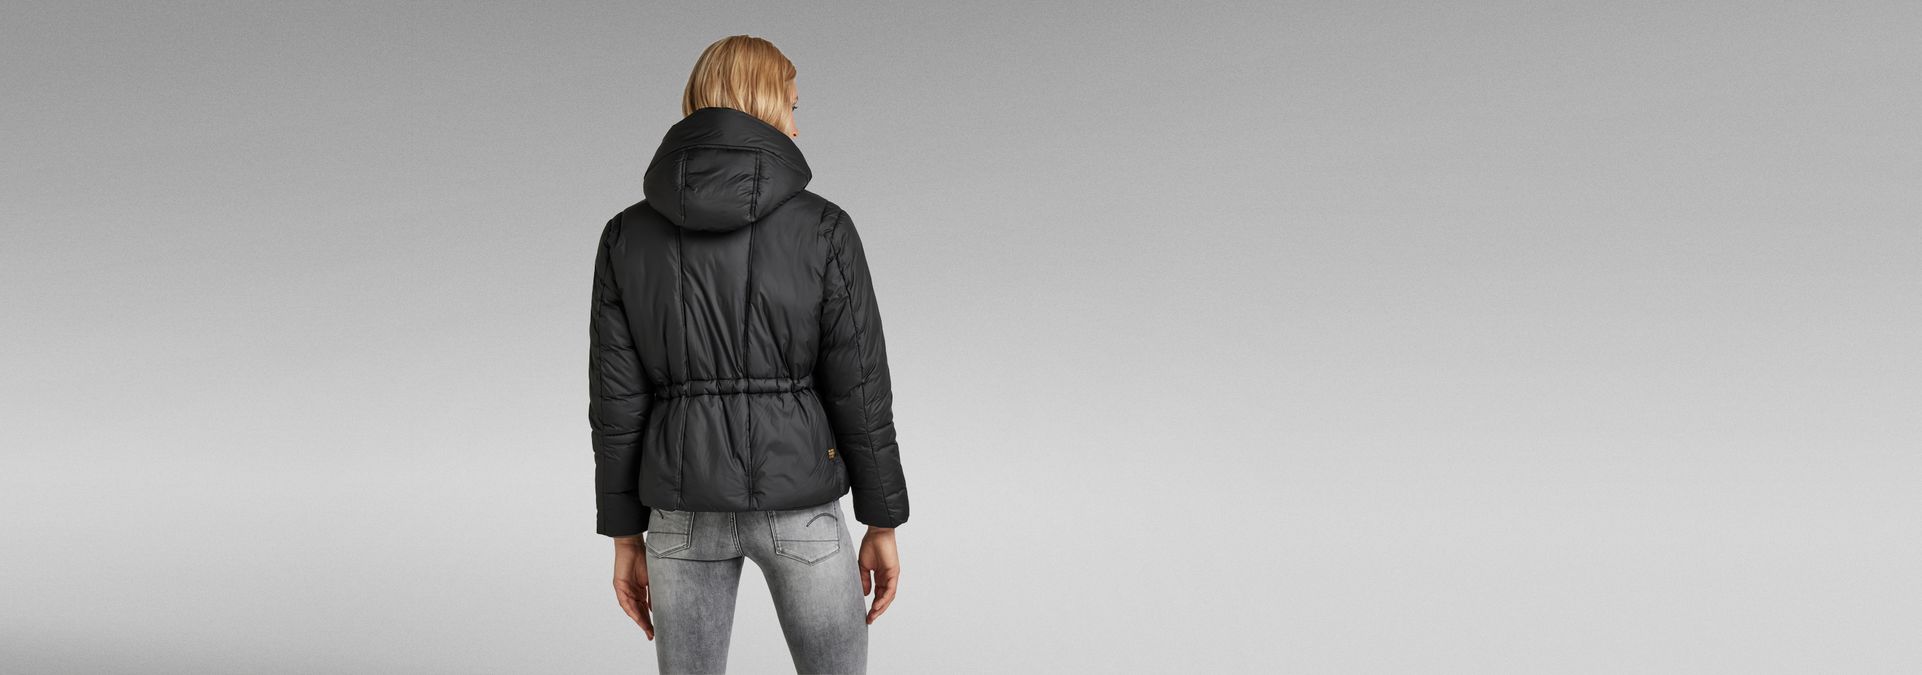 G-Star RAW G-whistler Short Padded Jacket in Grey Womens Clothing Jackets Casual jackets 